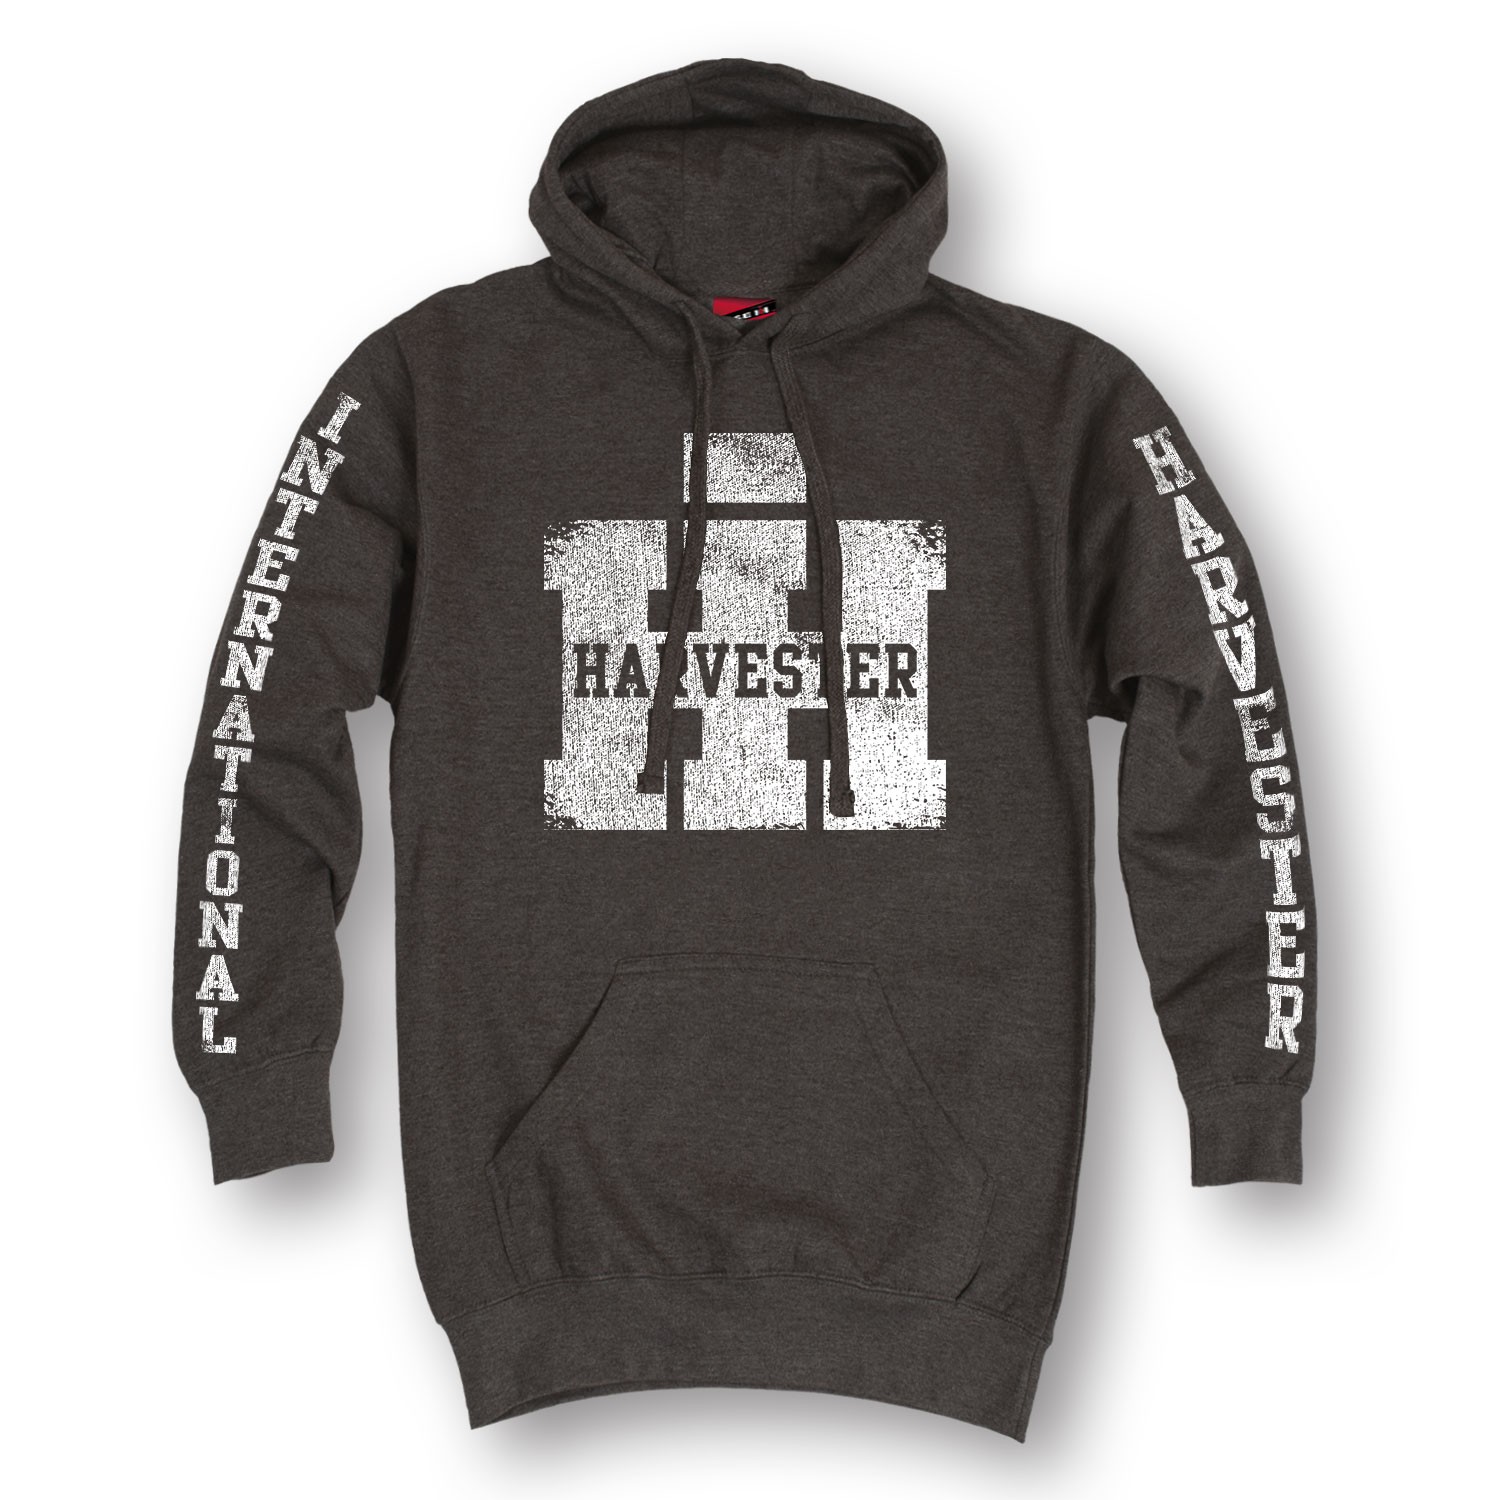 IH Worn Logo and Sleeve Print Hoodie in Red and Heather Gray - Clothing